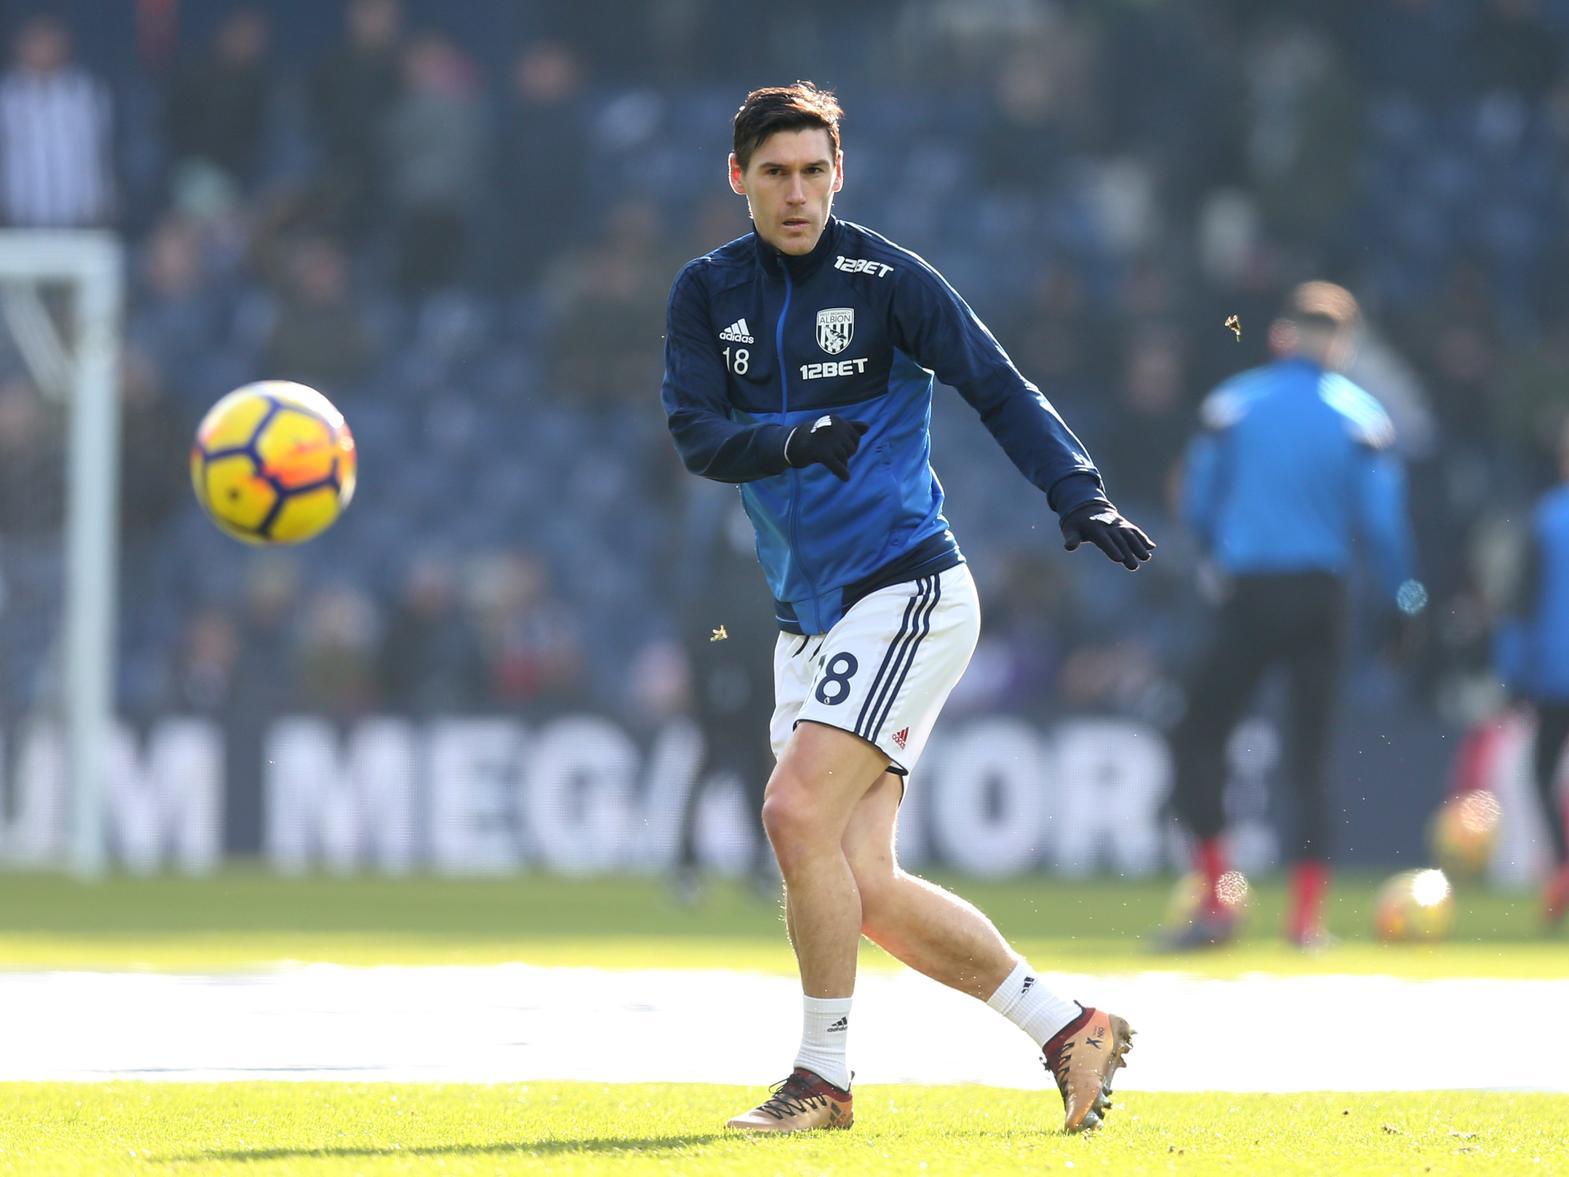 Veteran midfielder Gareth Barry has secured his returnto West Bromwich Albion on a short-term deal, claiming that he was unwilling to end his career with an injury as his final act. (Sky Sports)